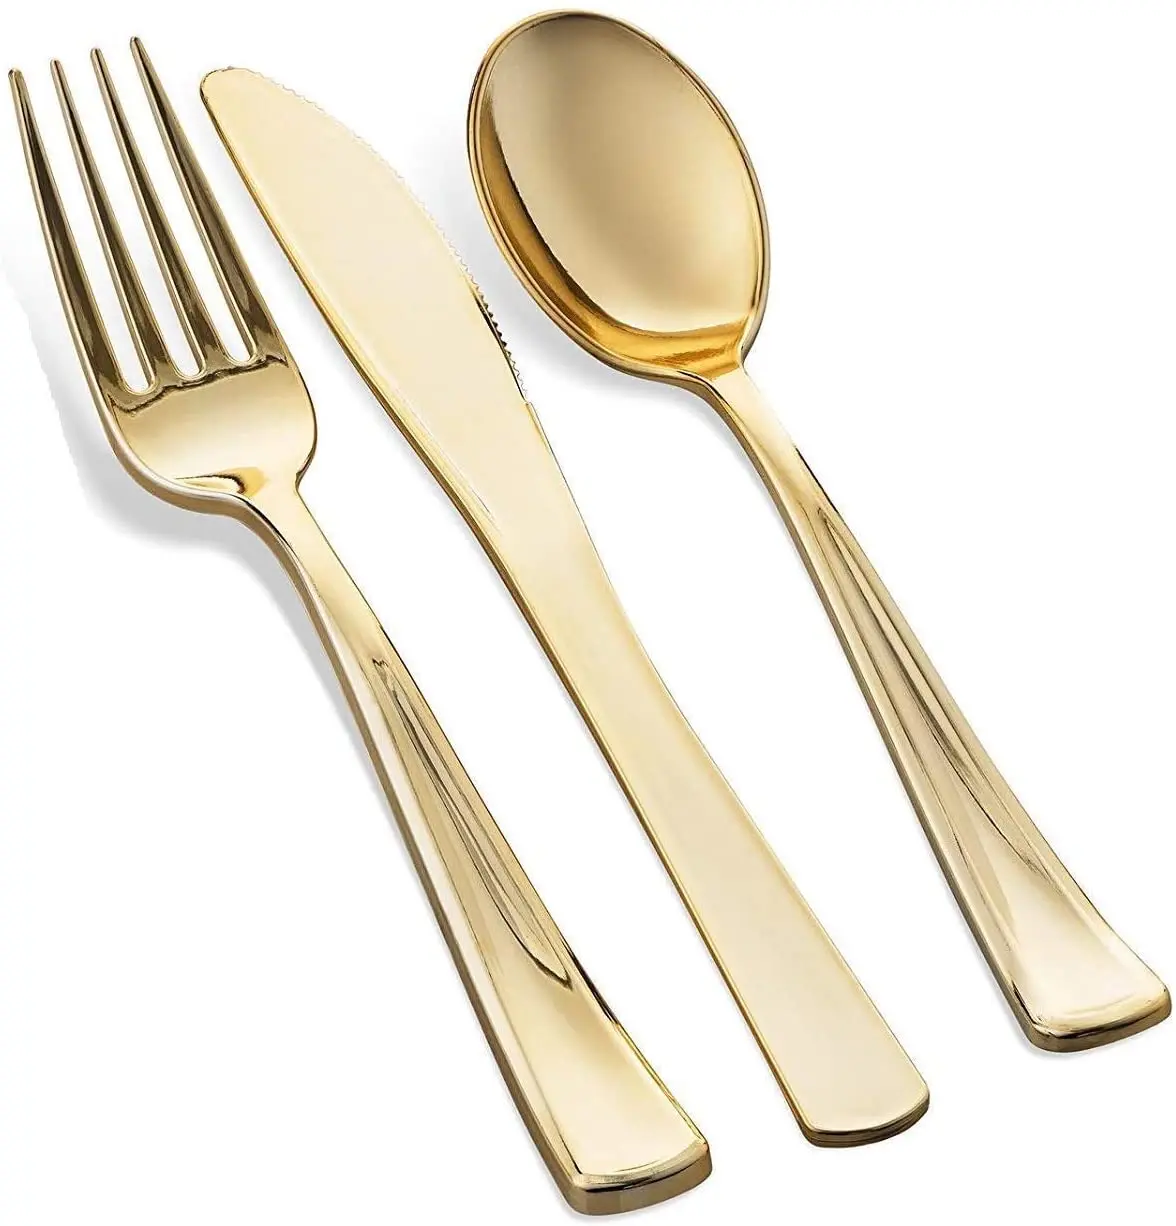 50 Pre Rolled Napkins with Gold Silverware and 50 Cups. Include:50 Dinner Plates,50 Dessert Plates 350 Pieces Gold Plastic Dinnerware,Disposable Gold Lace Plates 